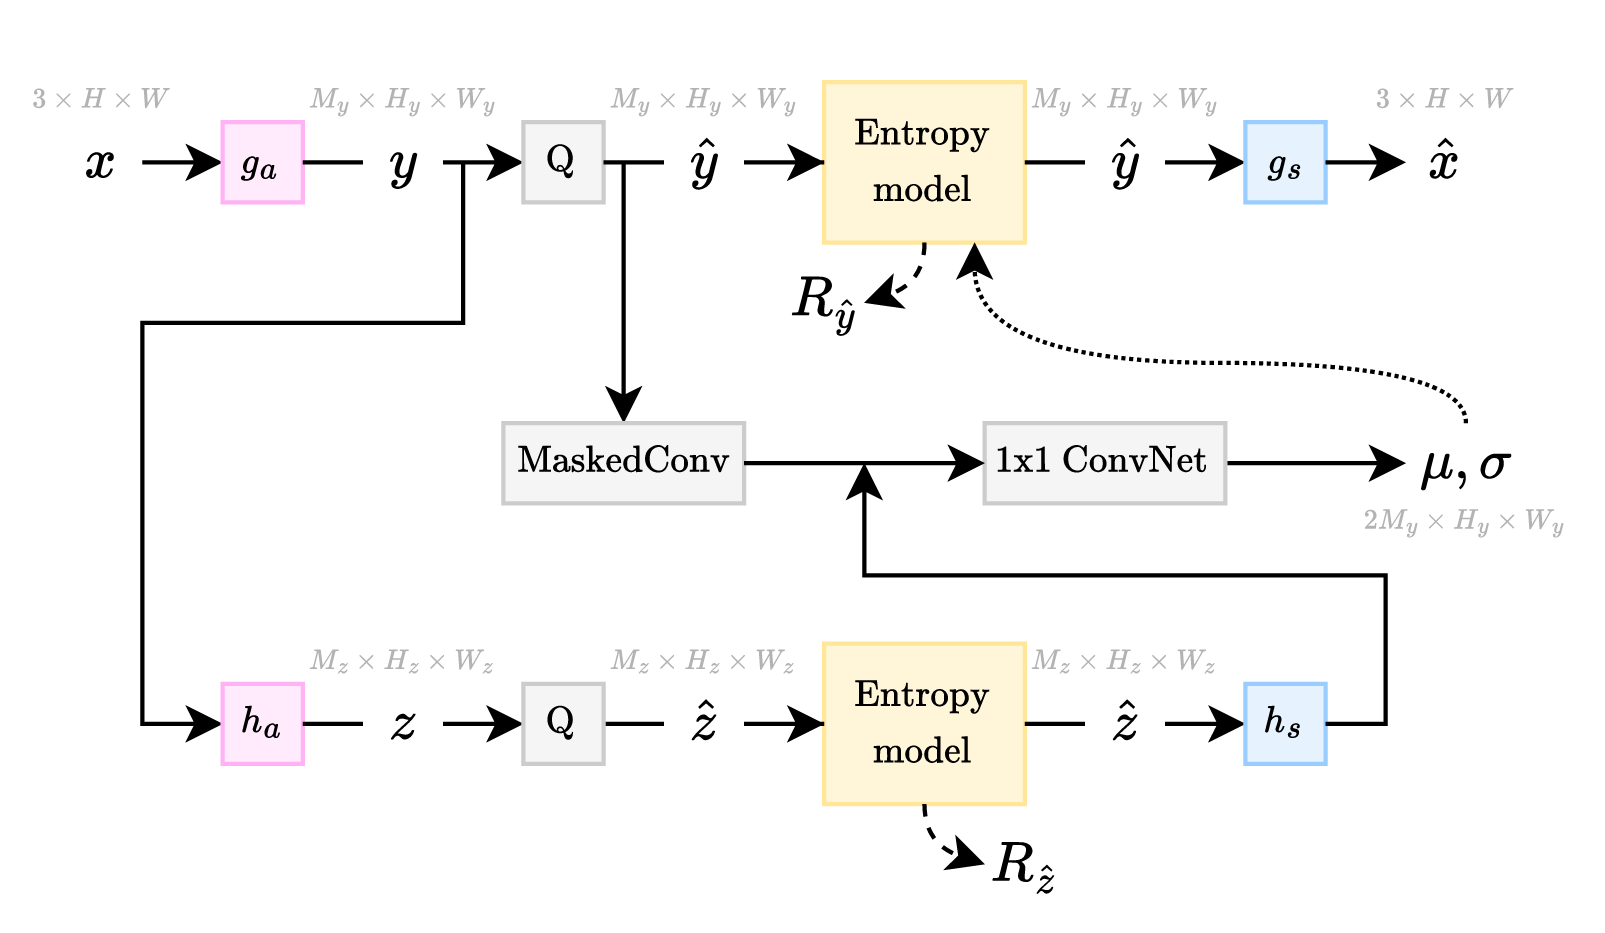 Autoregressive compression architecture. Like the hyperprior compression architecture, but y is decoded in several time steps. The means and scales for the part of y being decoded are improved by also using information about previously decoded elements from earlier time steps. One way to simulate this time-changing process during training is by applying a masked convolution to the quantized y_hat.